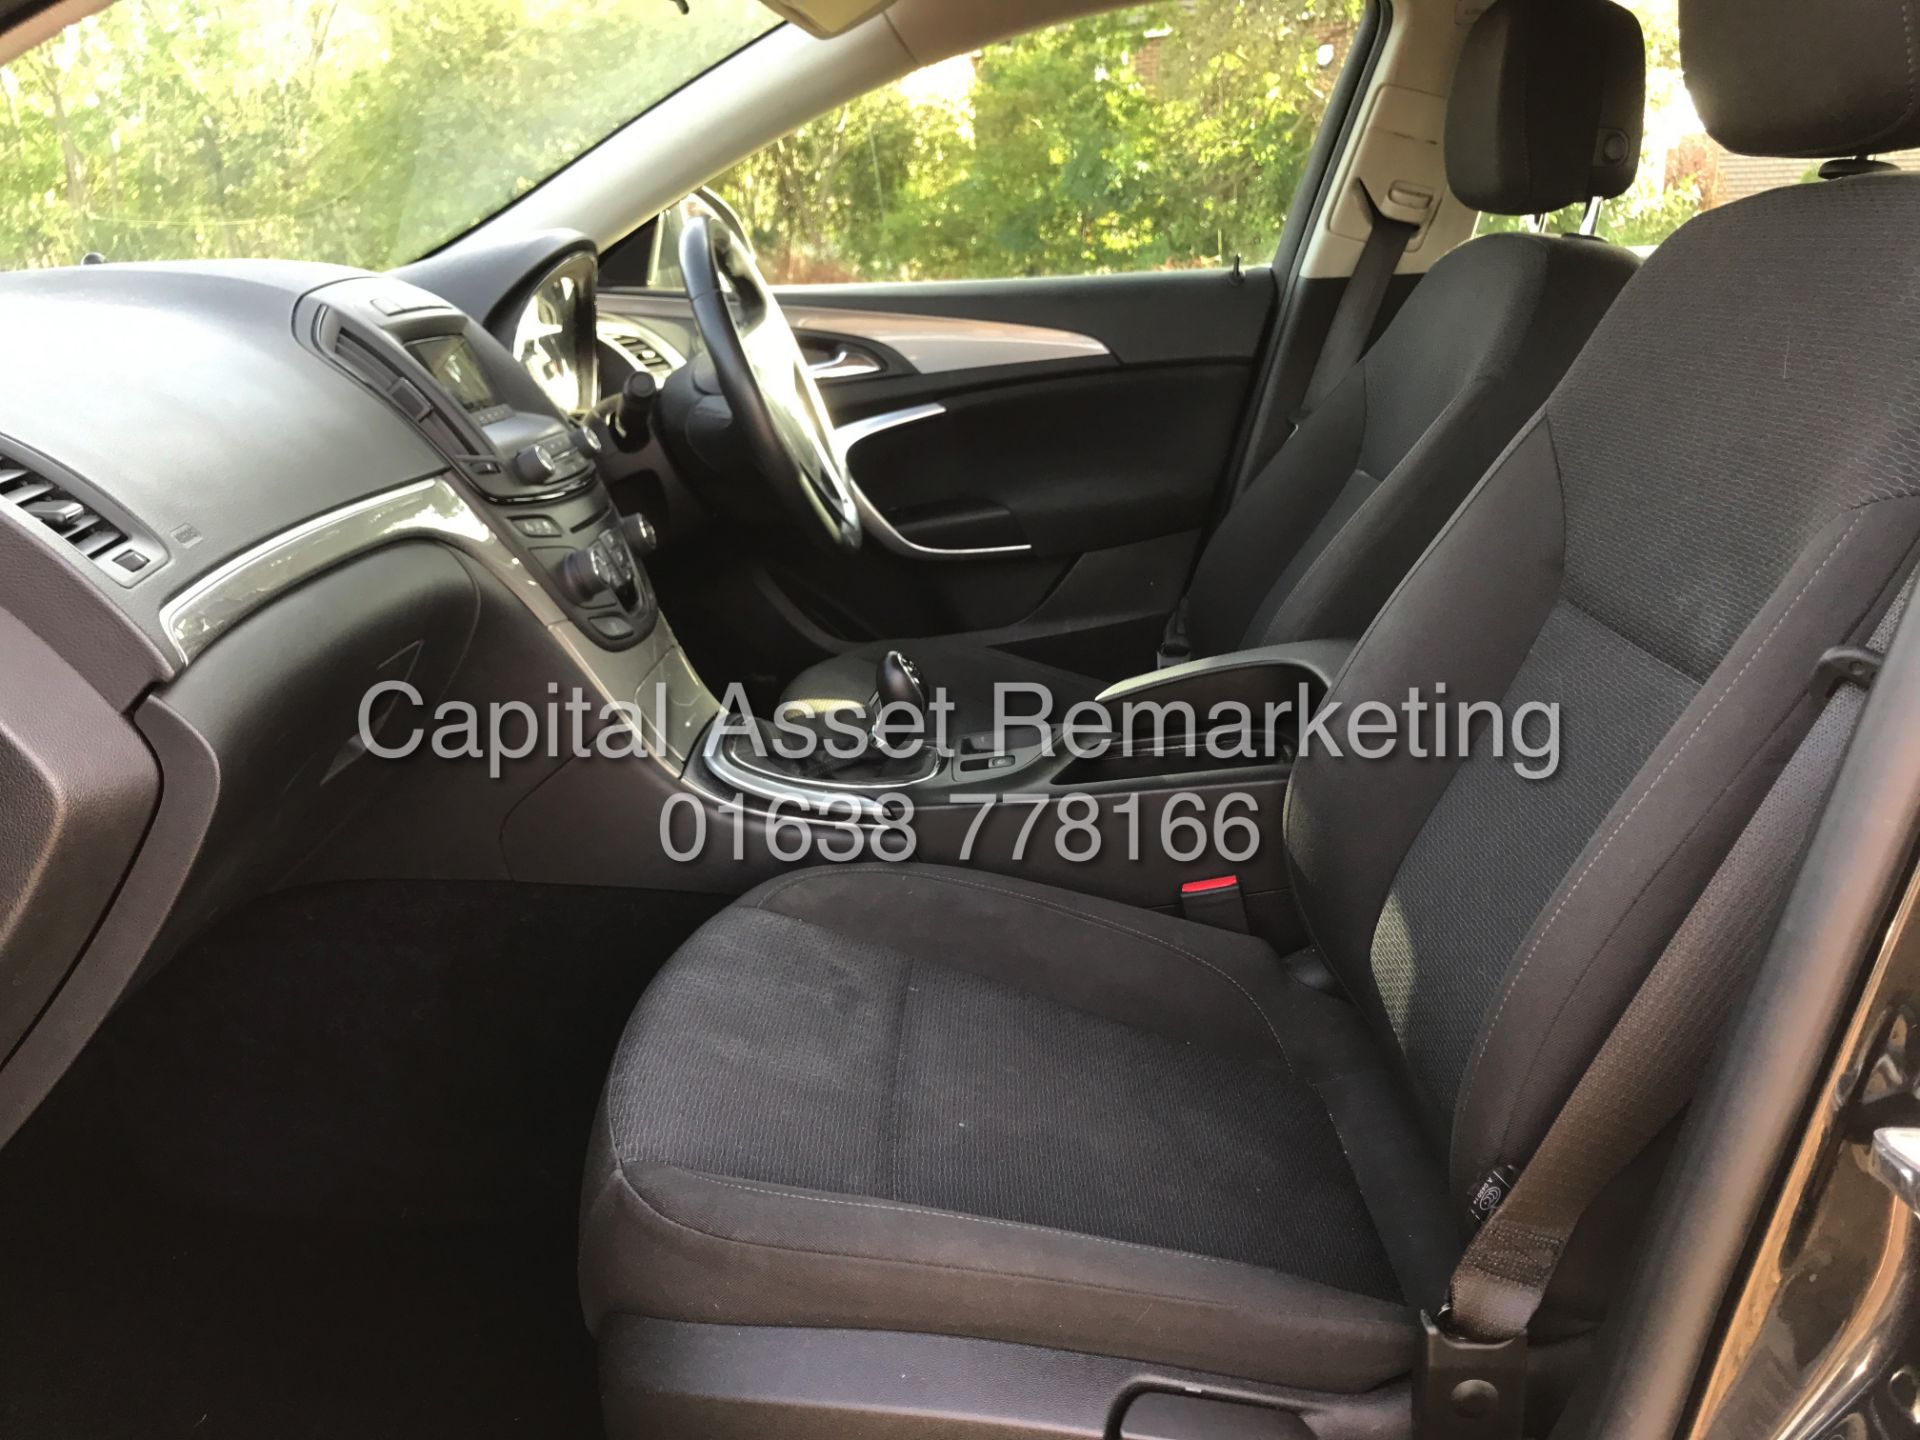 On Sale VAUXHALL INSIGNIA 2.0CDTI "DESIGN" 6 SPEED (2014 MODEL-NEW SHAPE) AIR CON -ELEC PACK -CRUISE - Image 13 of 22